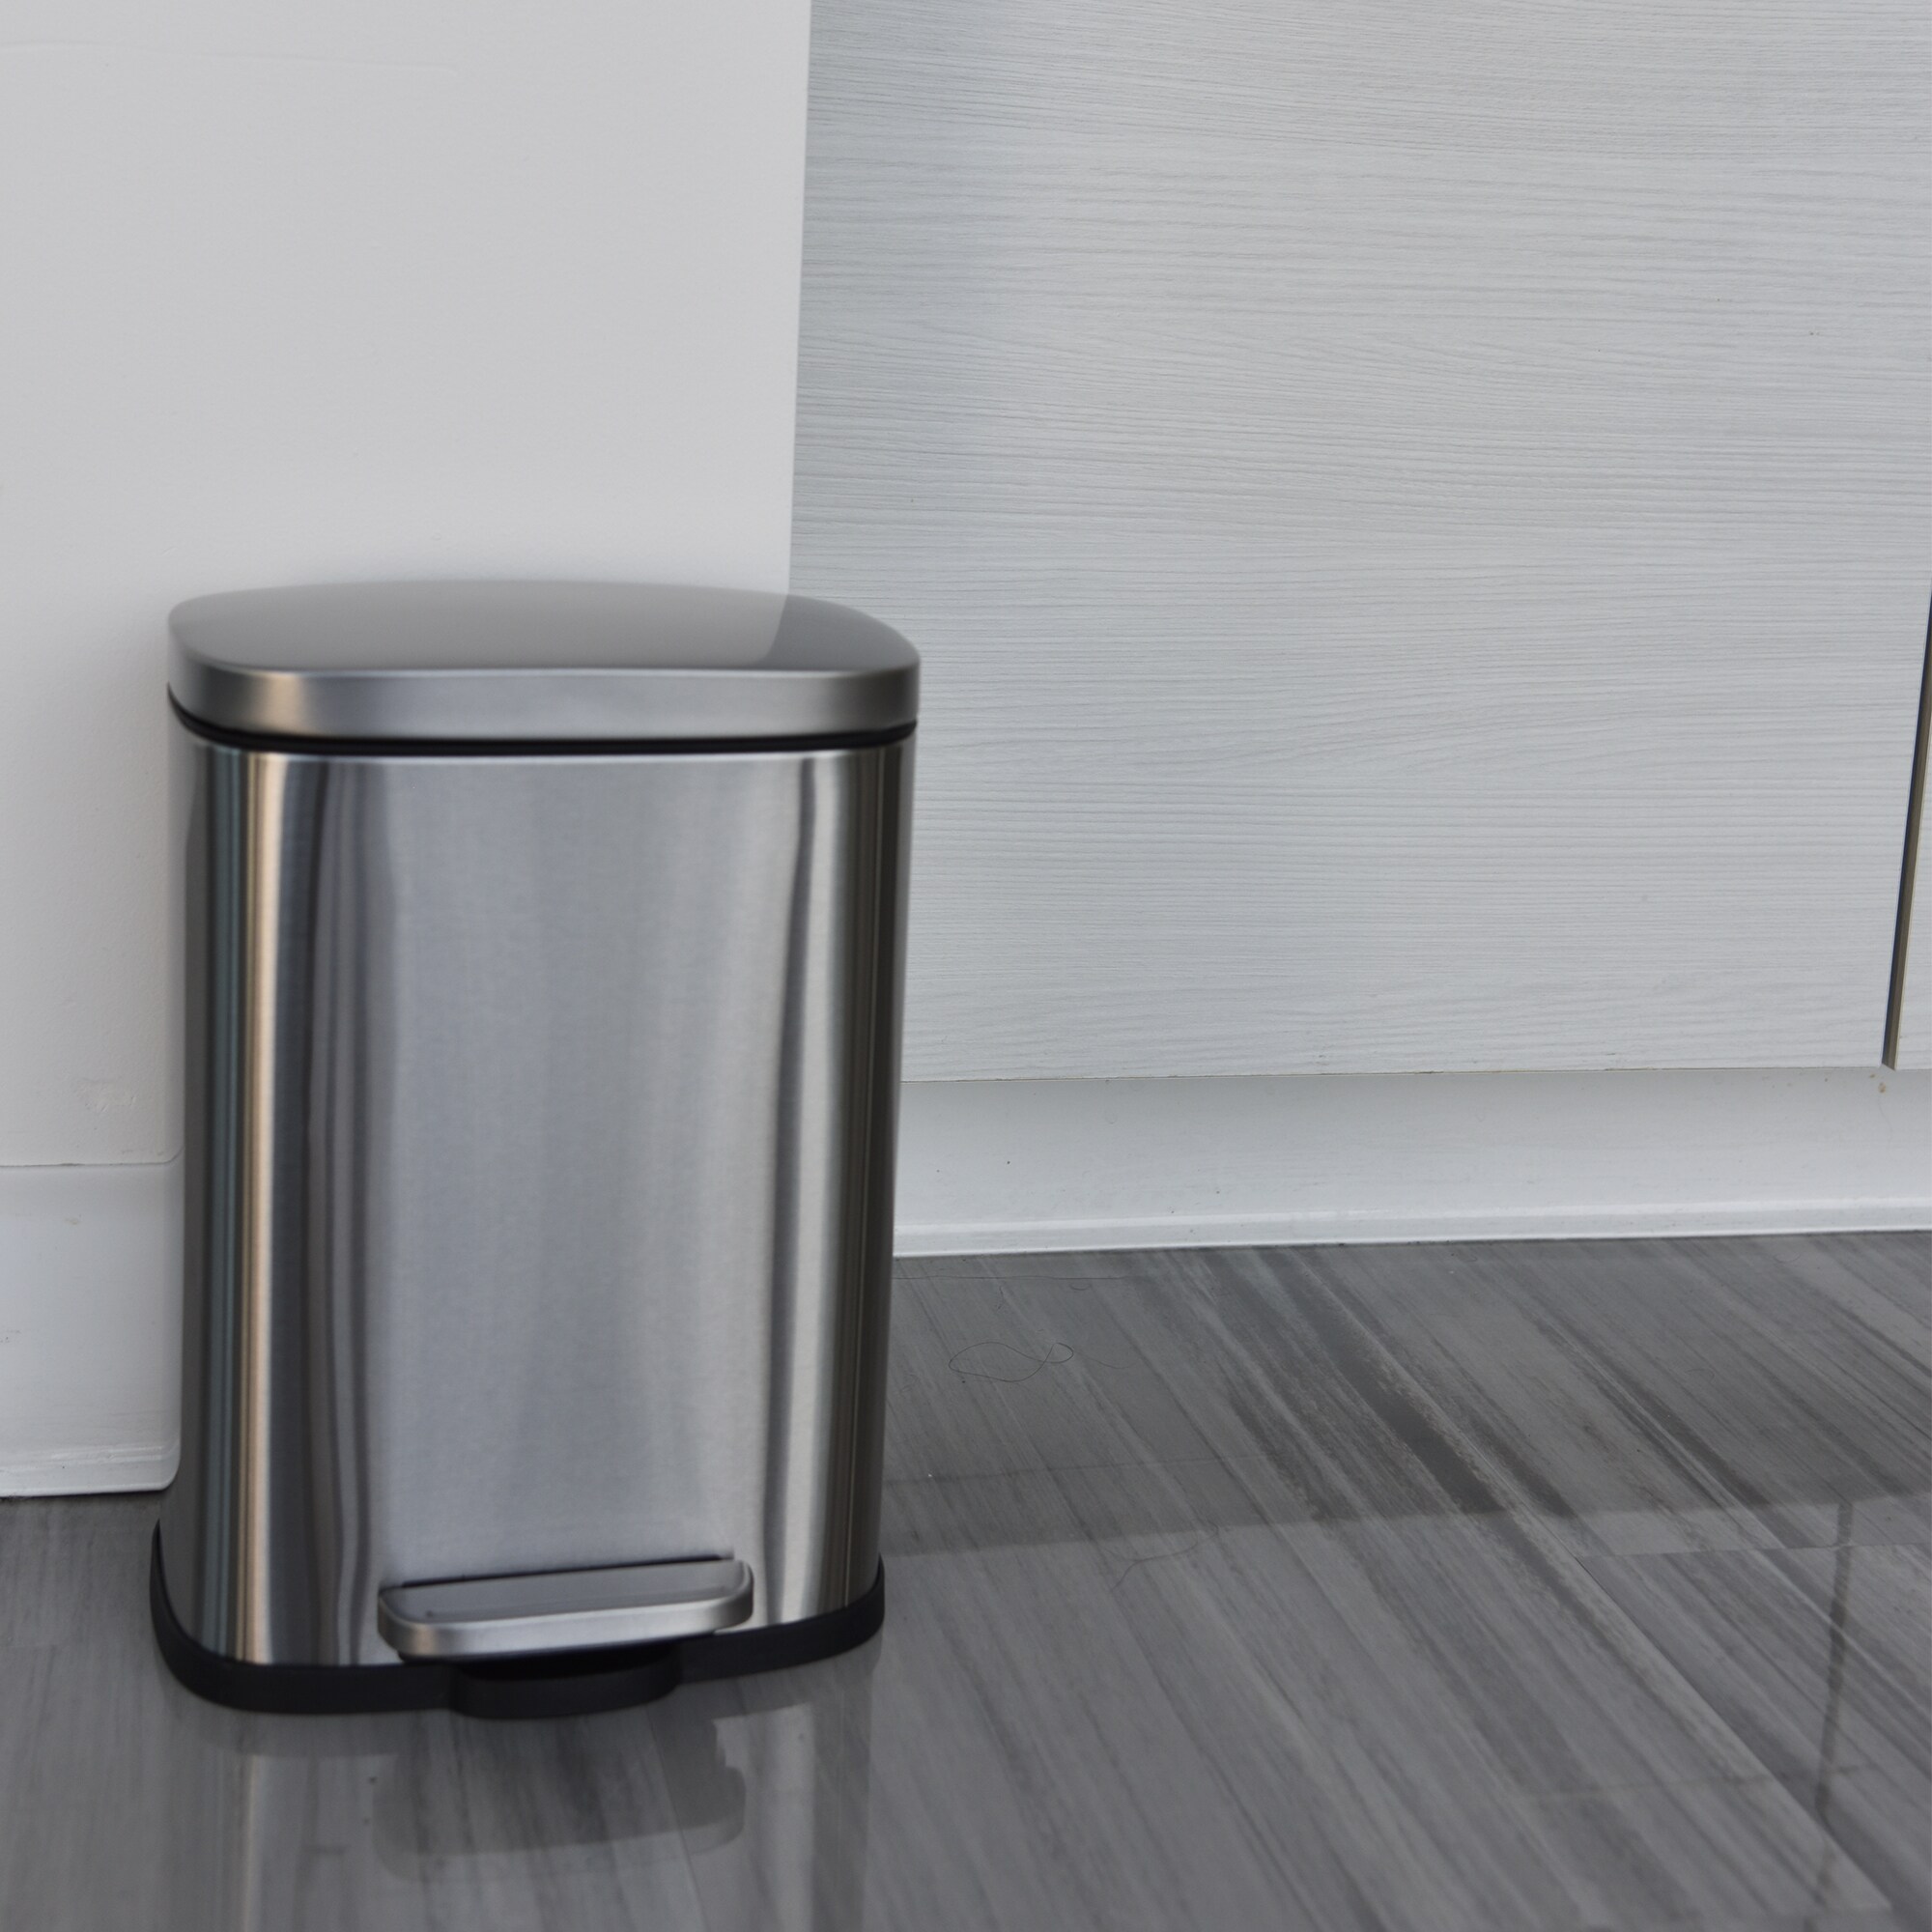 https://ak1.ostkcdn.com/images/products/18236157/Step-Stainless-Steel-Trash-Can-889fd160-ac26-4b34-92c7-0a3ce7982f1a.jpg